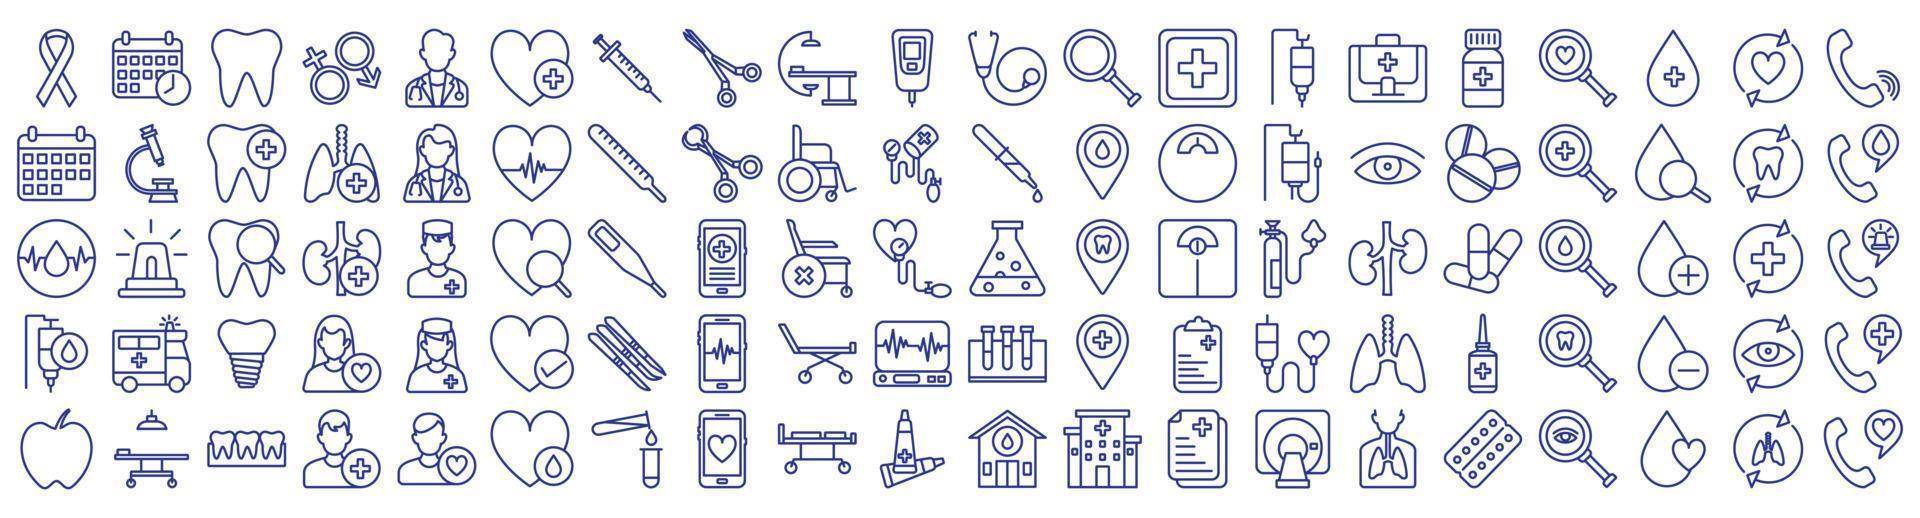 Collection of icons related to Cardiology and health care, including icons like Cancer ribbon, Tooth, Heart and more. vector illustrations, Pixel Perfect